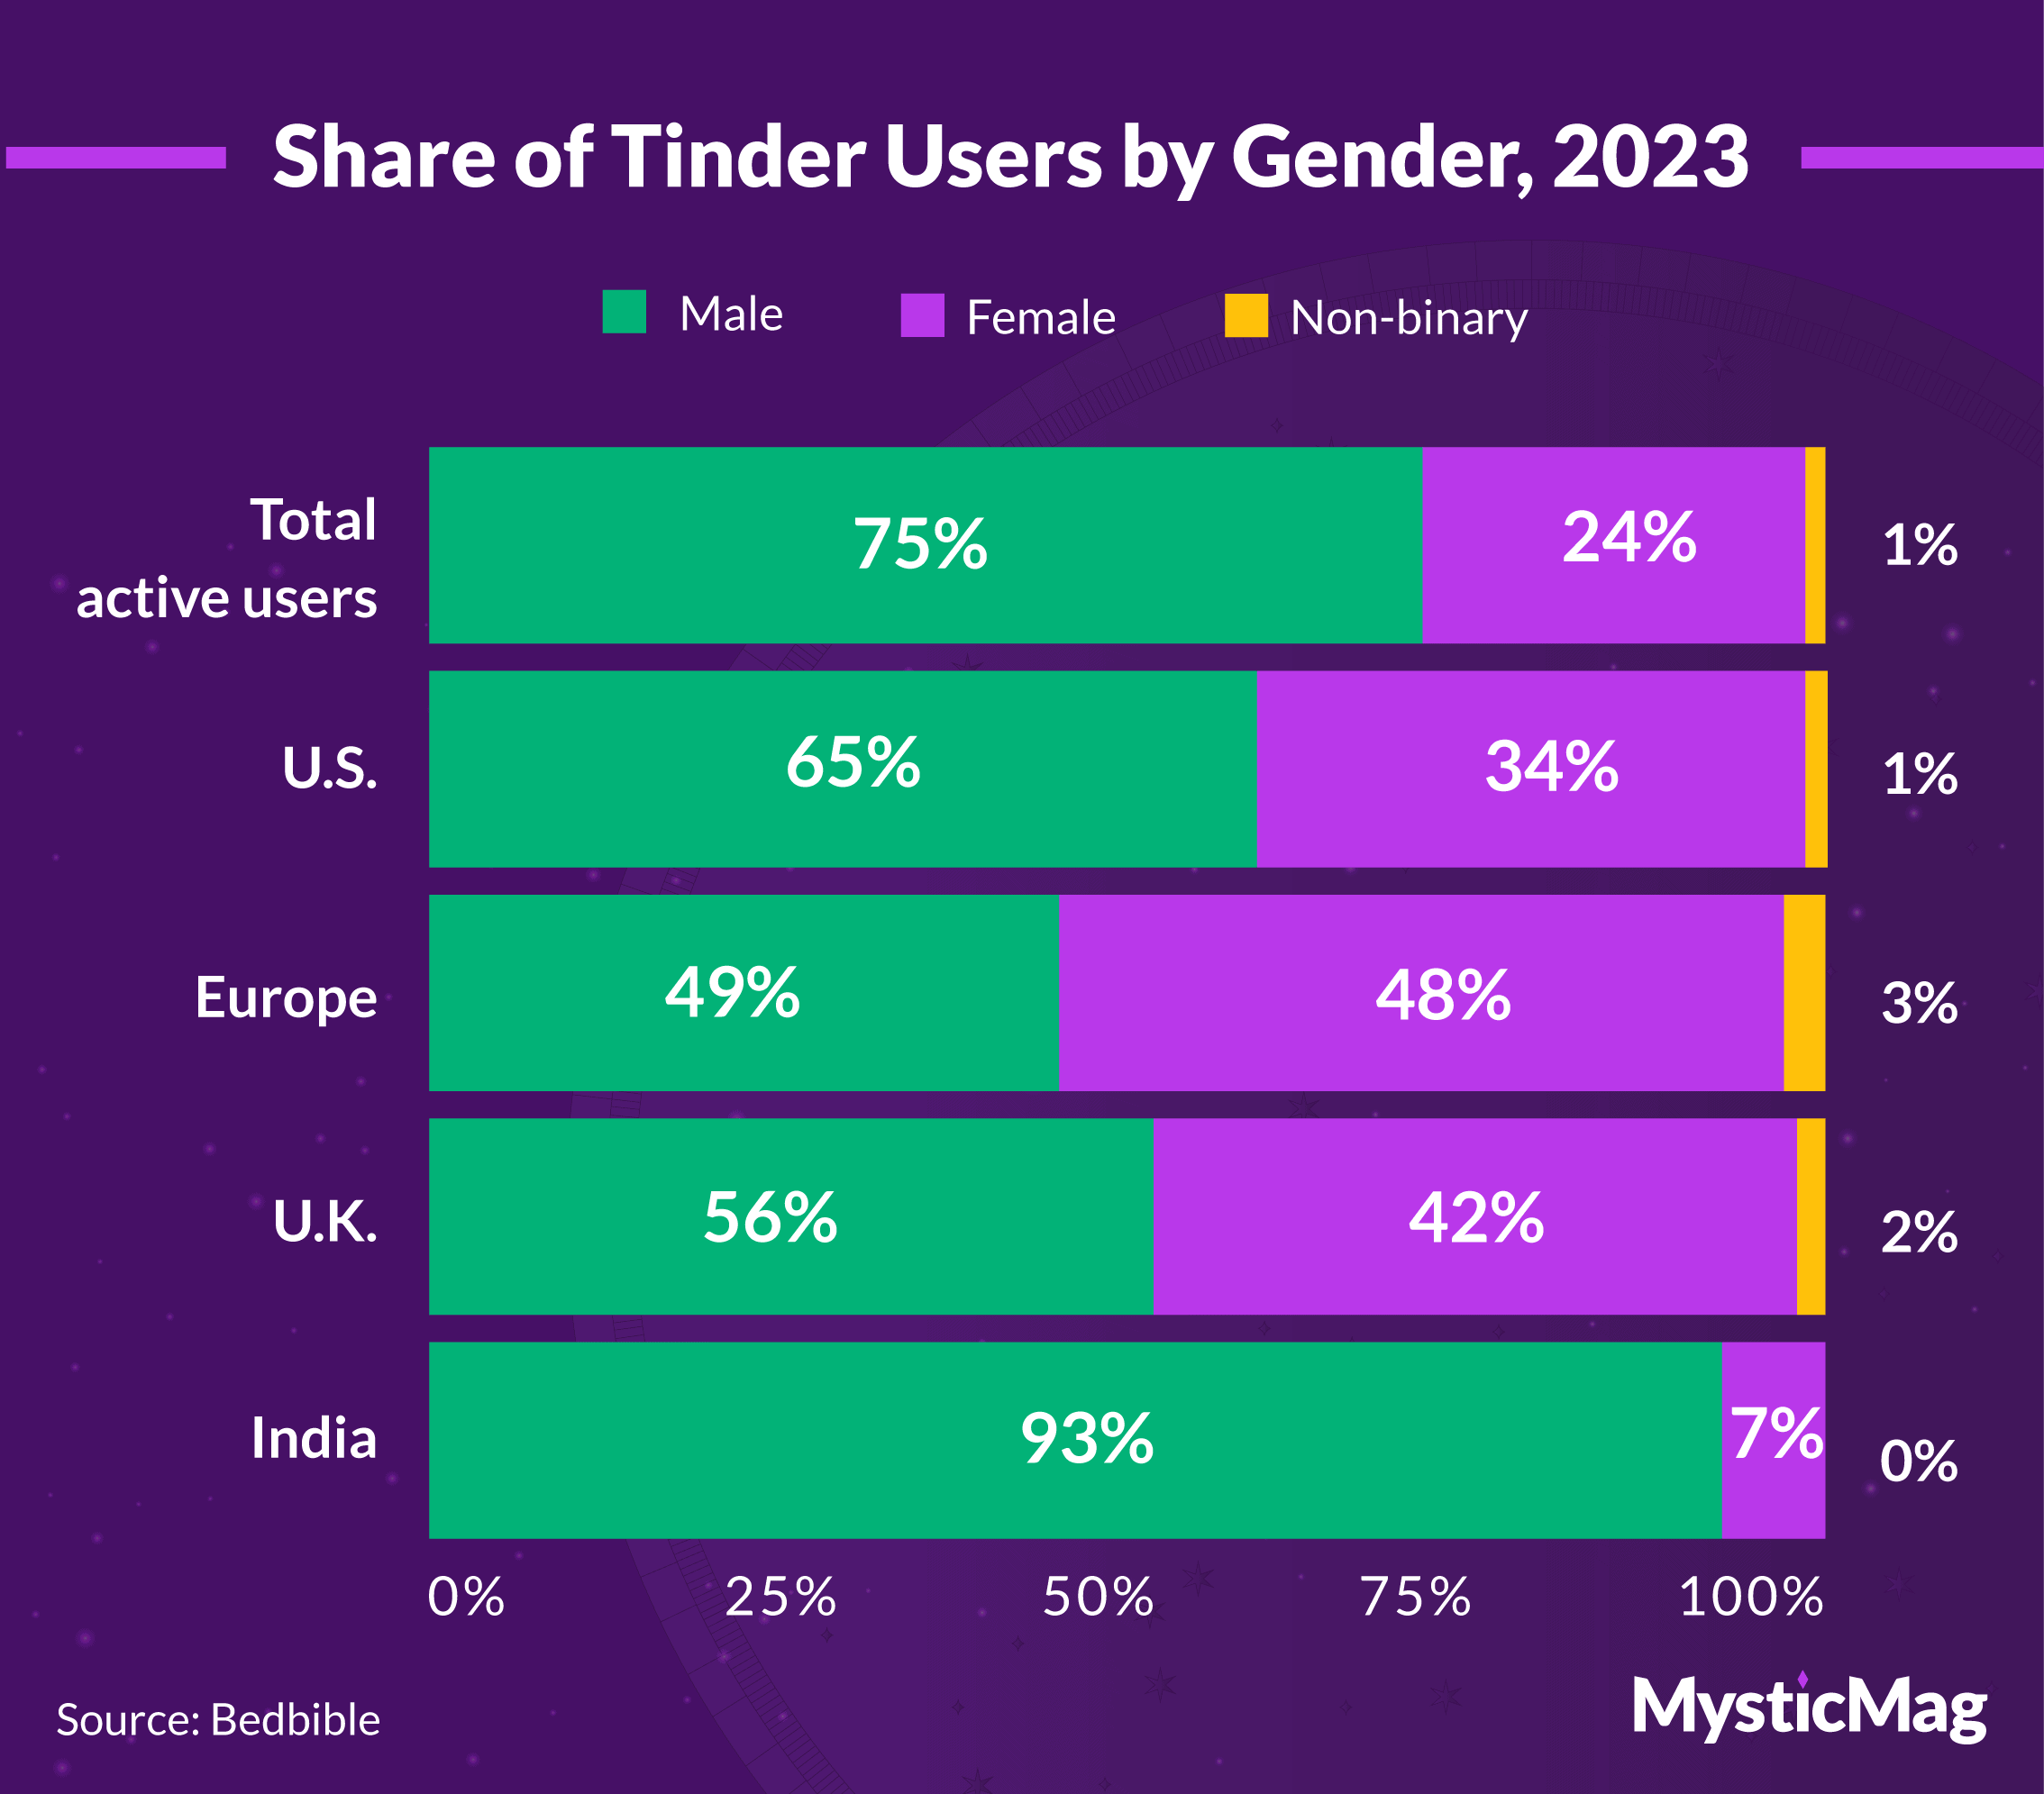 Share of Tinder users by gender, 2023